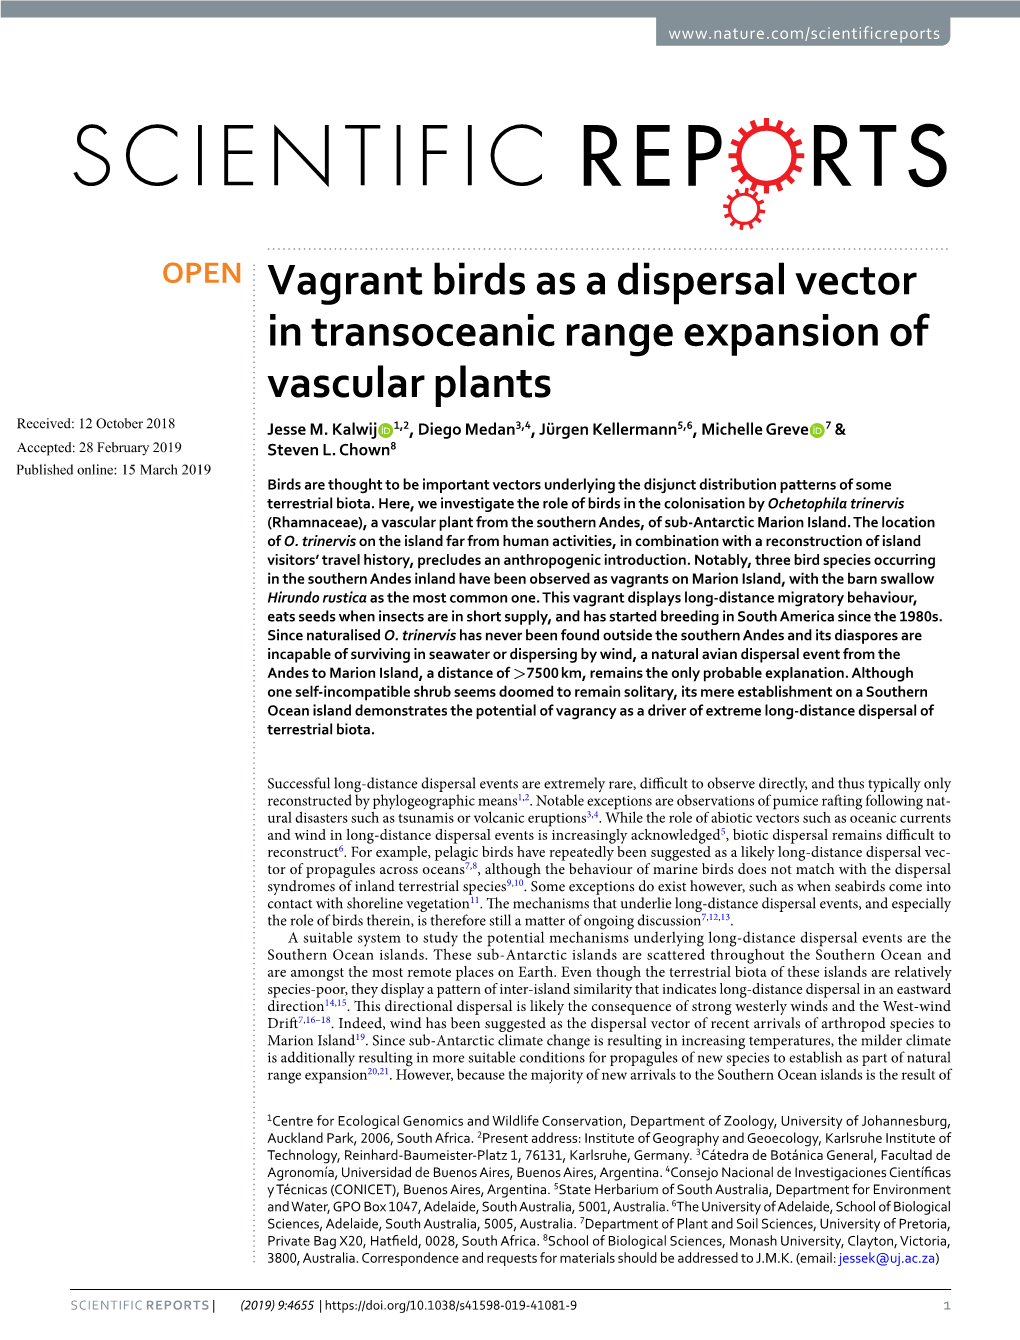 Vagrant Birds As a Dispersal Vector in Transoceanic Range Expansion of Vascular Plants Received: 12 October 2018 Jesse M